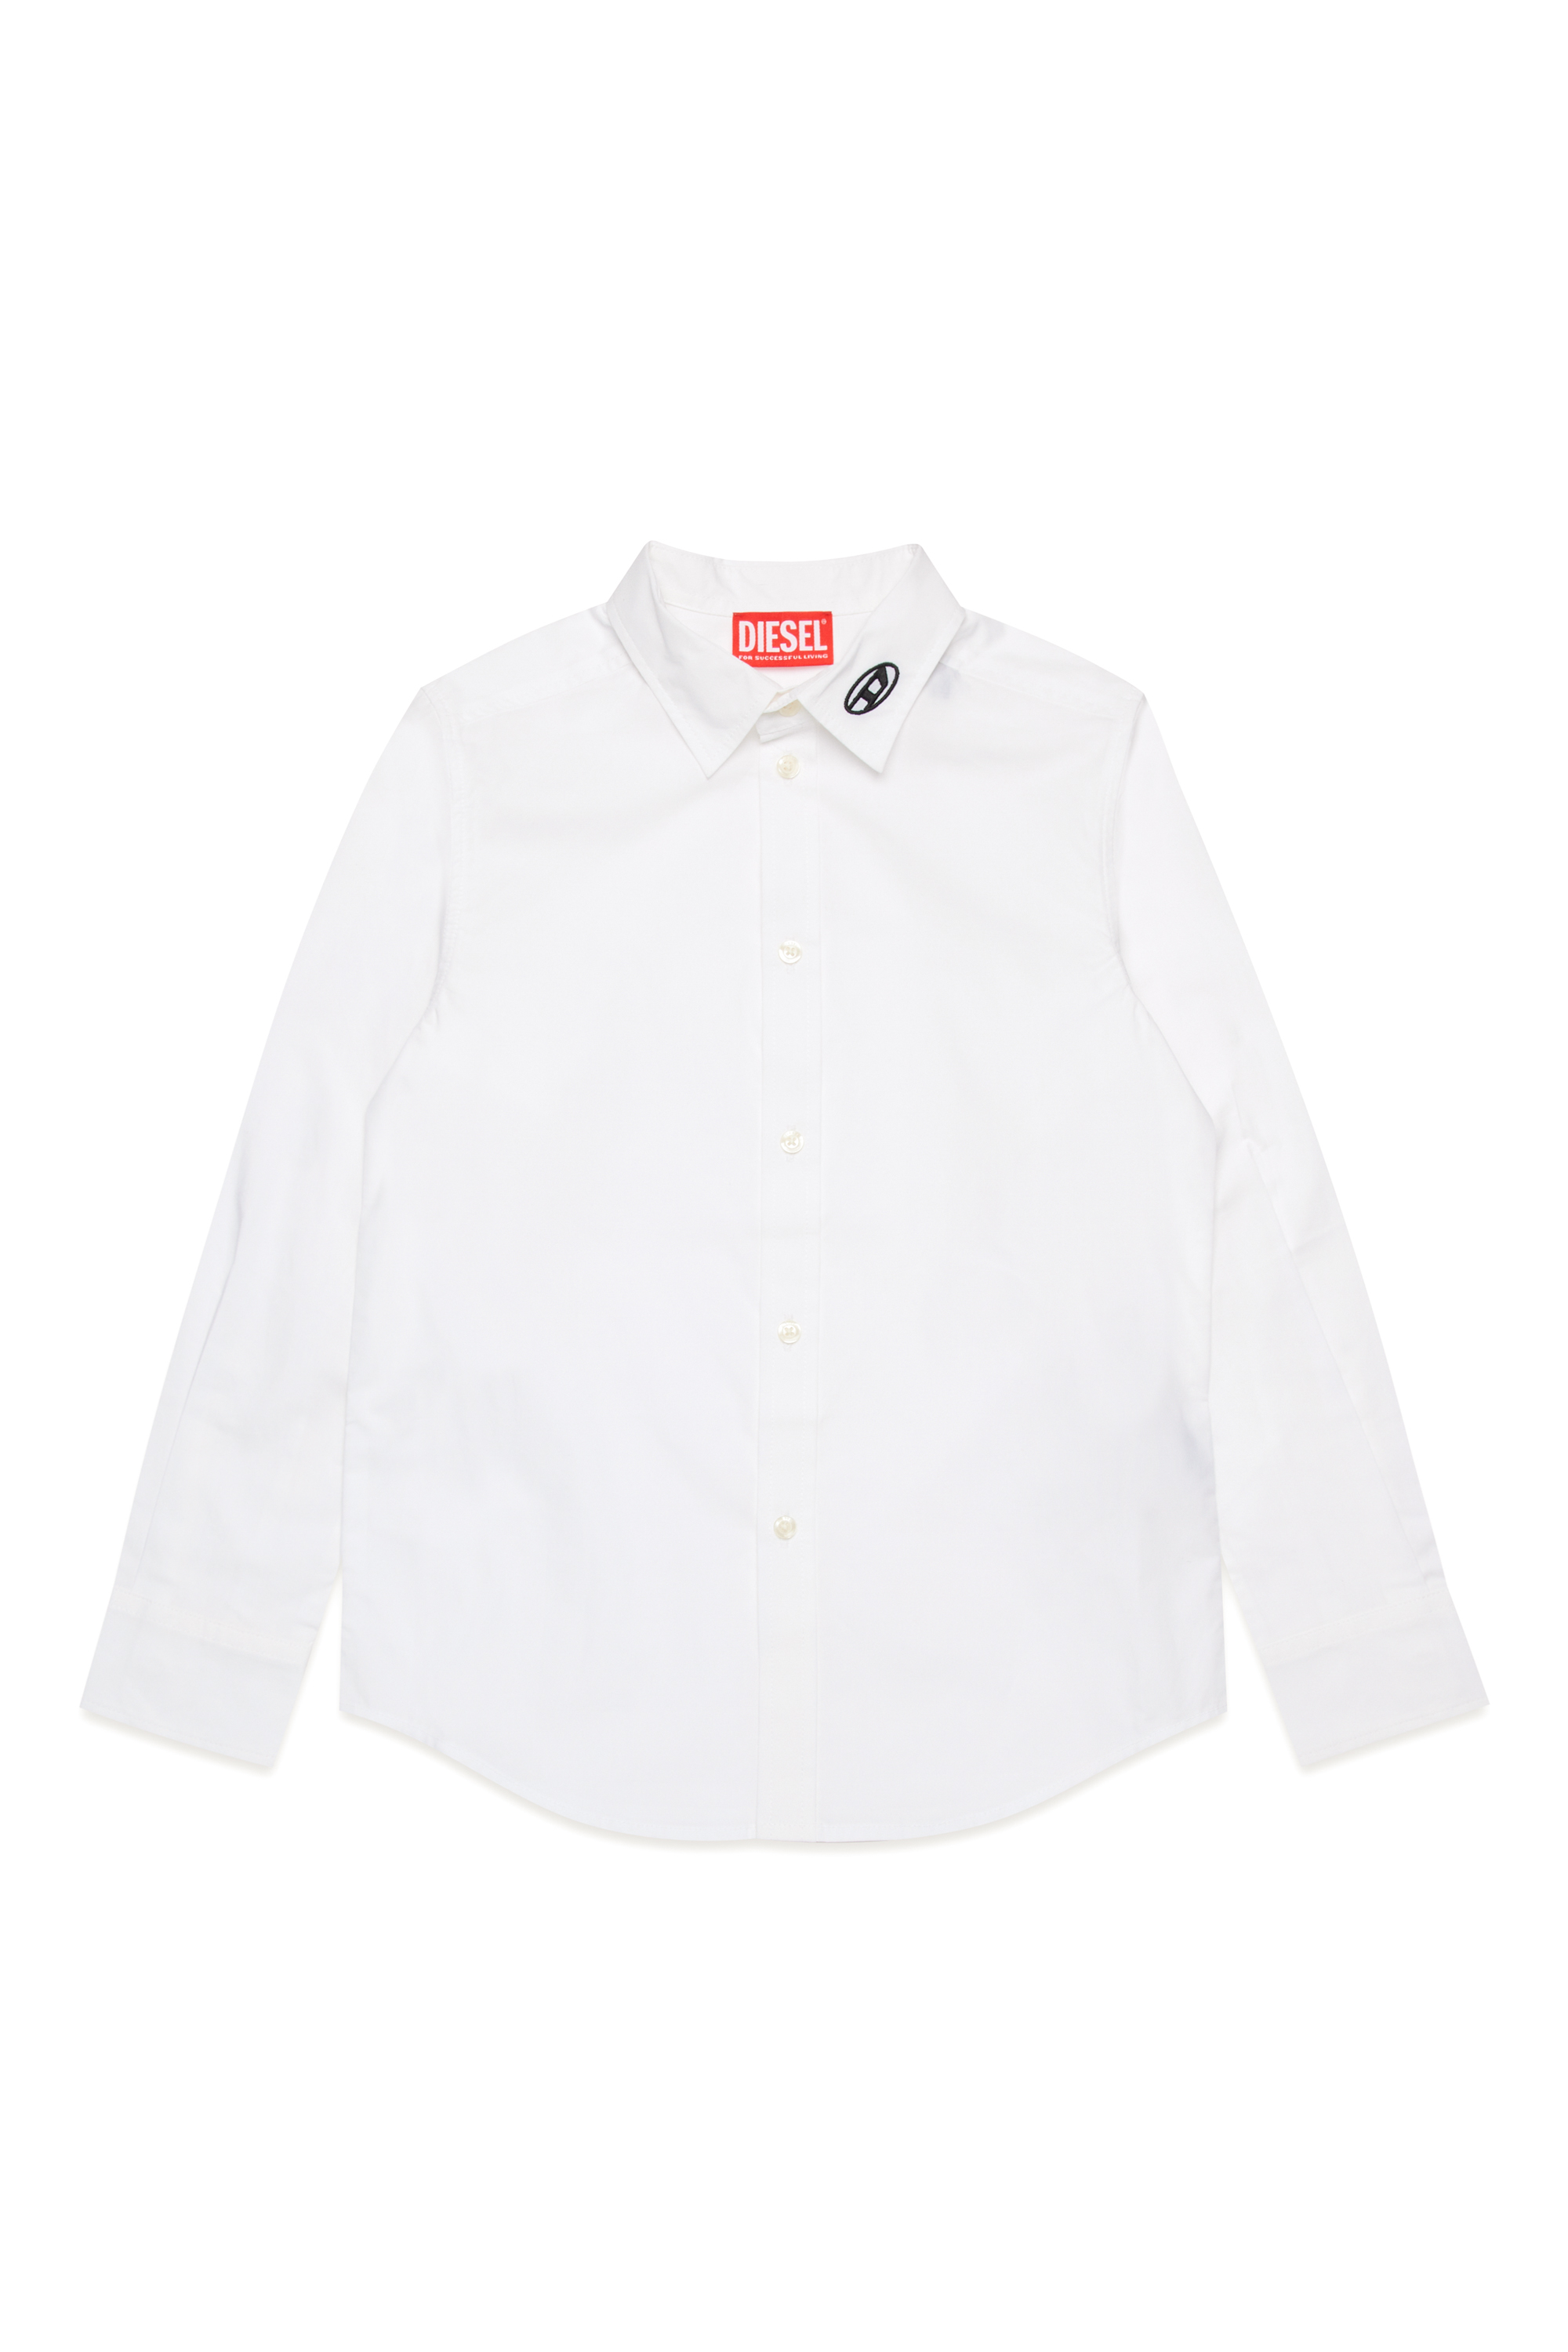 Diesel - CPINGO, Homme Chemise à manches longues avec broderie Oval D in Blanc - Image 1